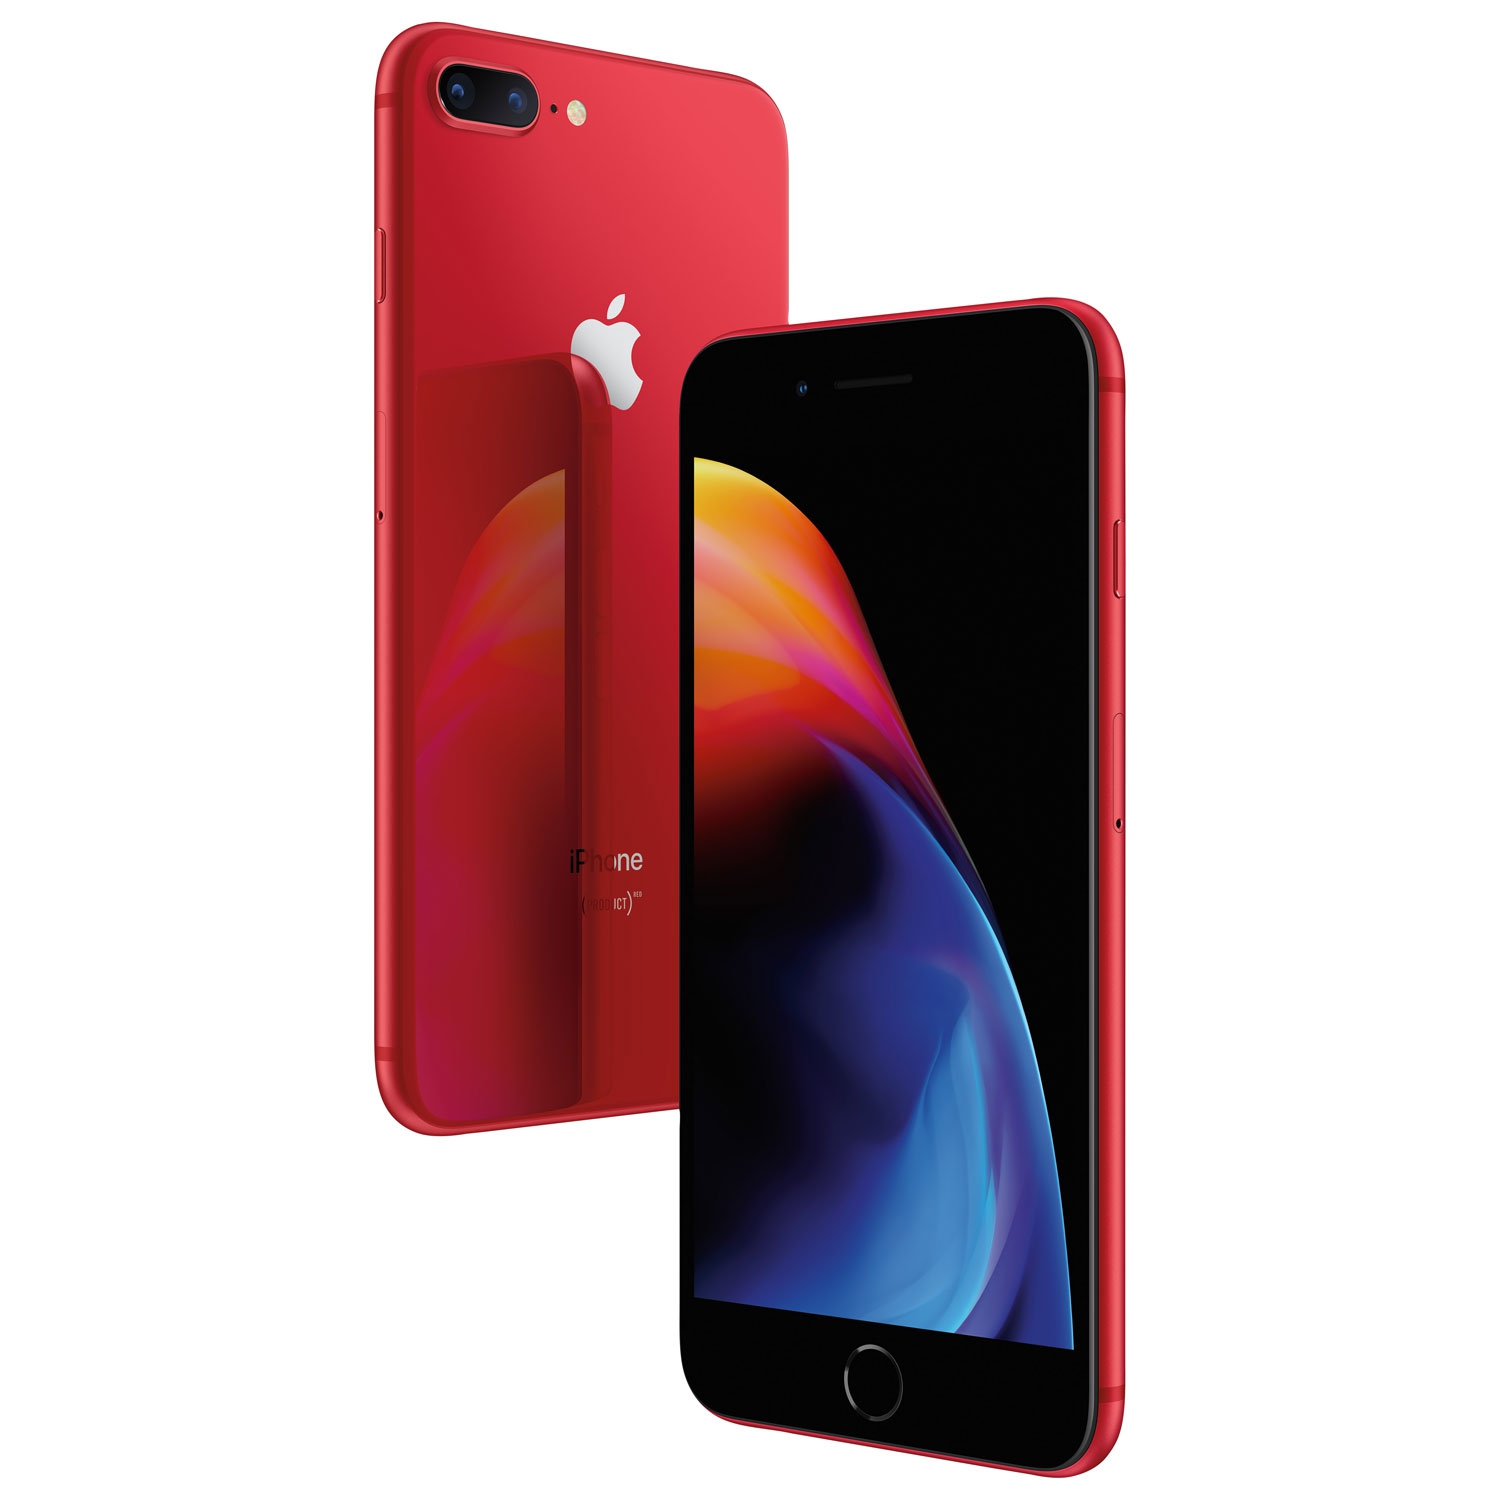 Refurbished (Excellent) - Apple iPhone 8 256GB Smartphone - (Product)RED - Unlocked - Certified Refurbished